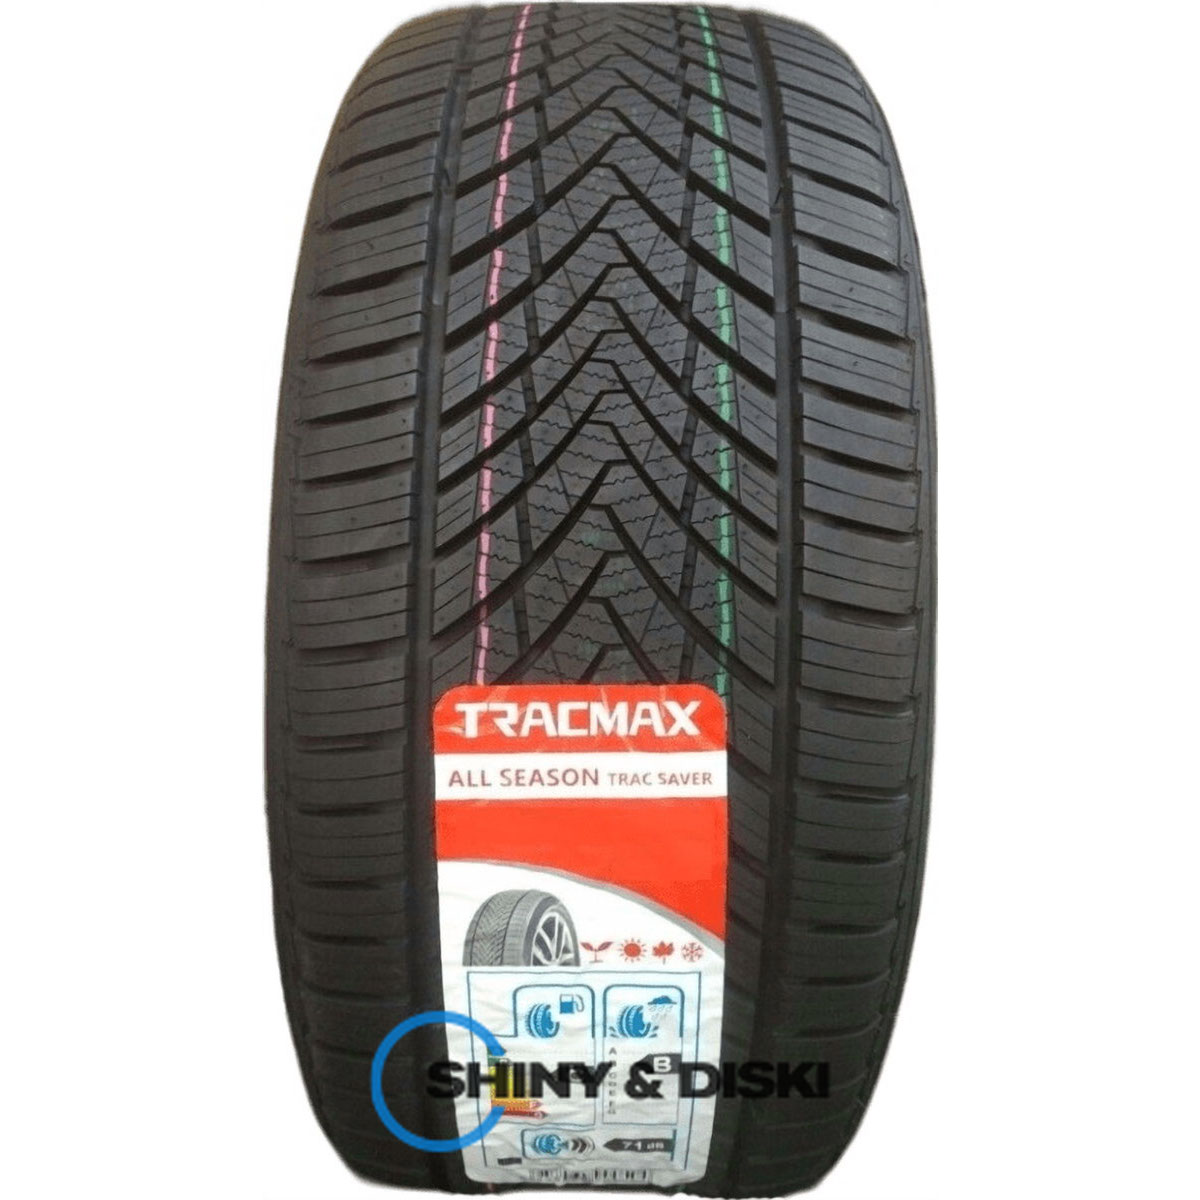 покрышки tracmax a/s trac saver 155/65 r13 73t